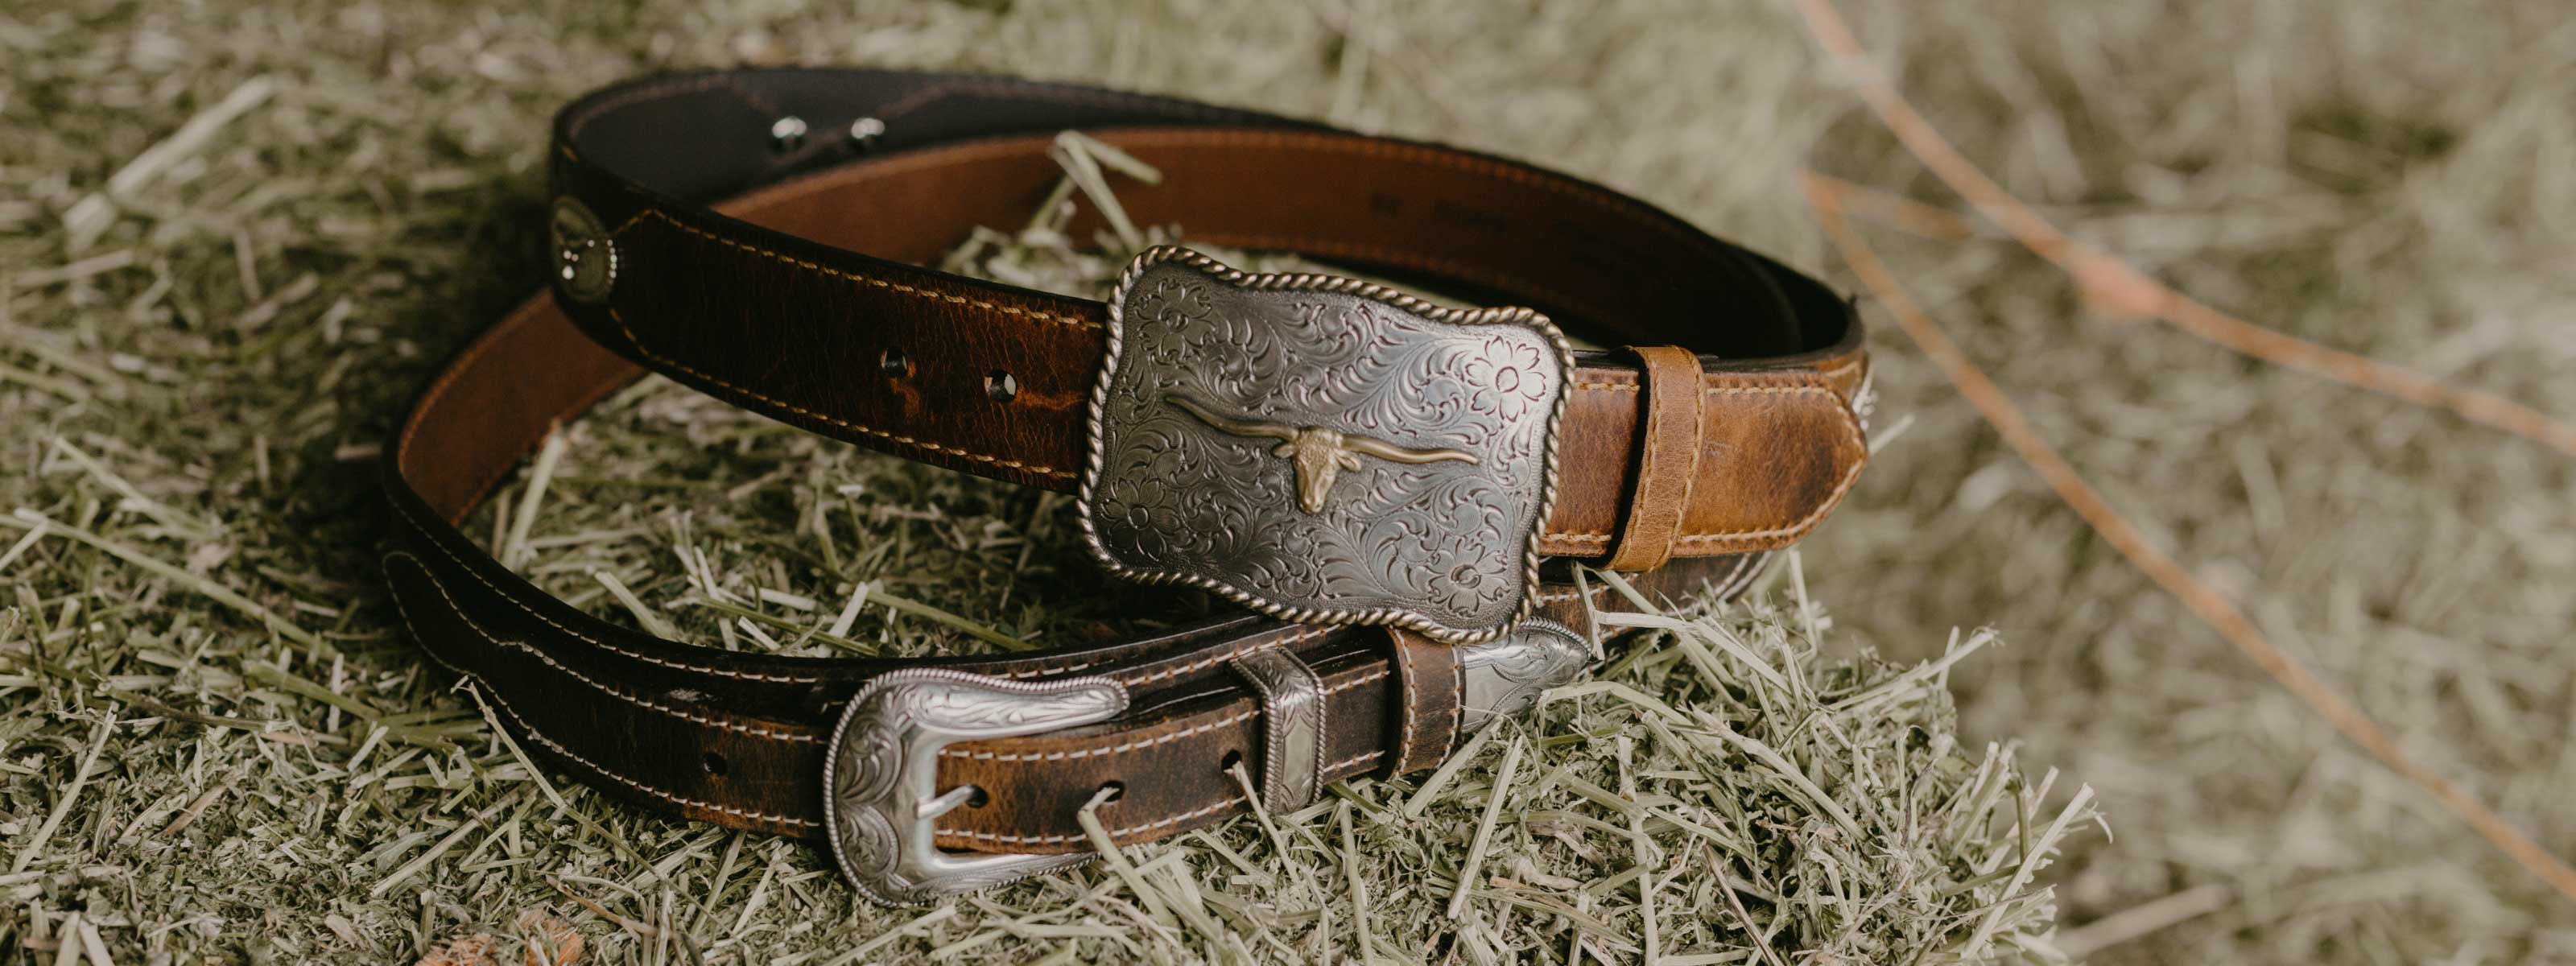 Handcrafted Leather Belts Made in the USA.